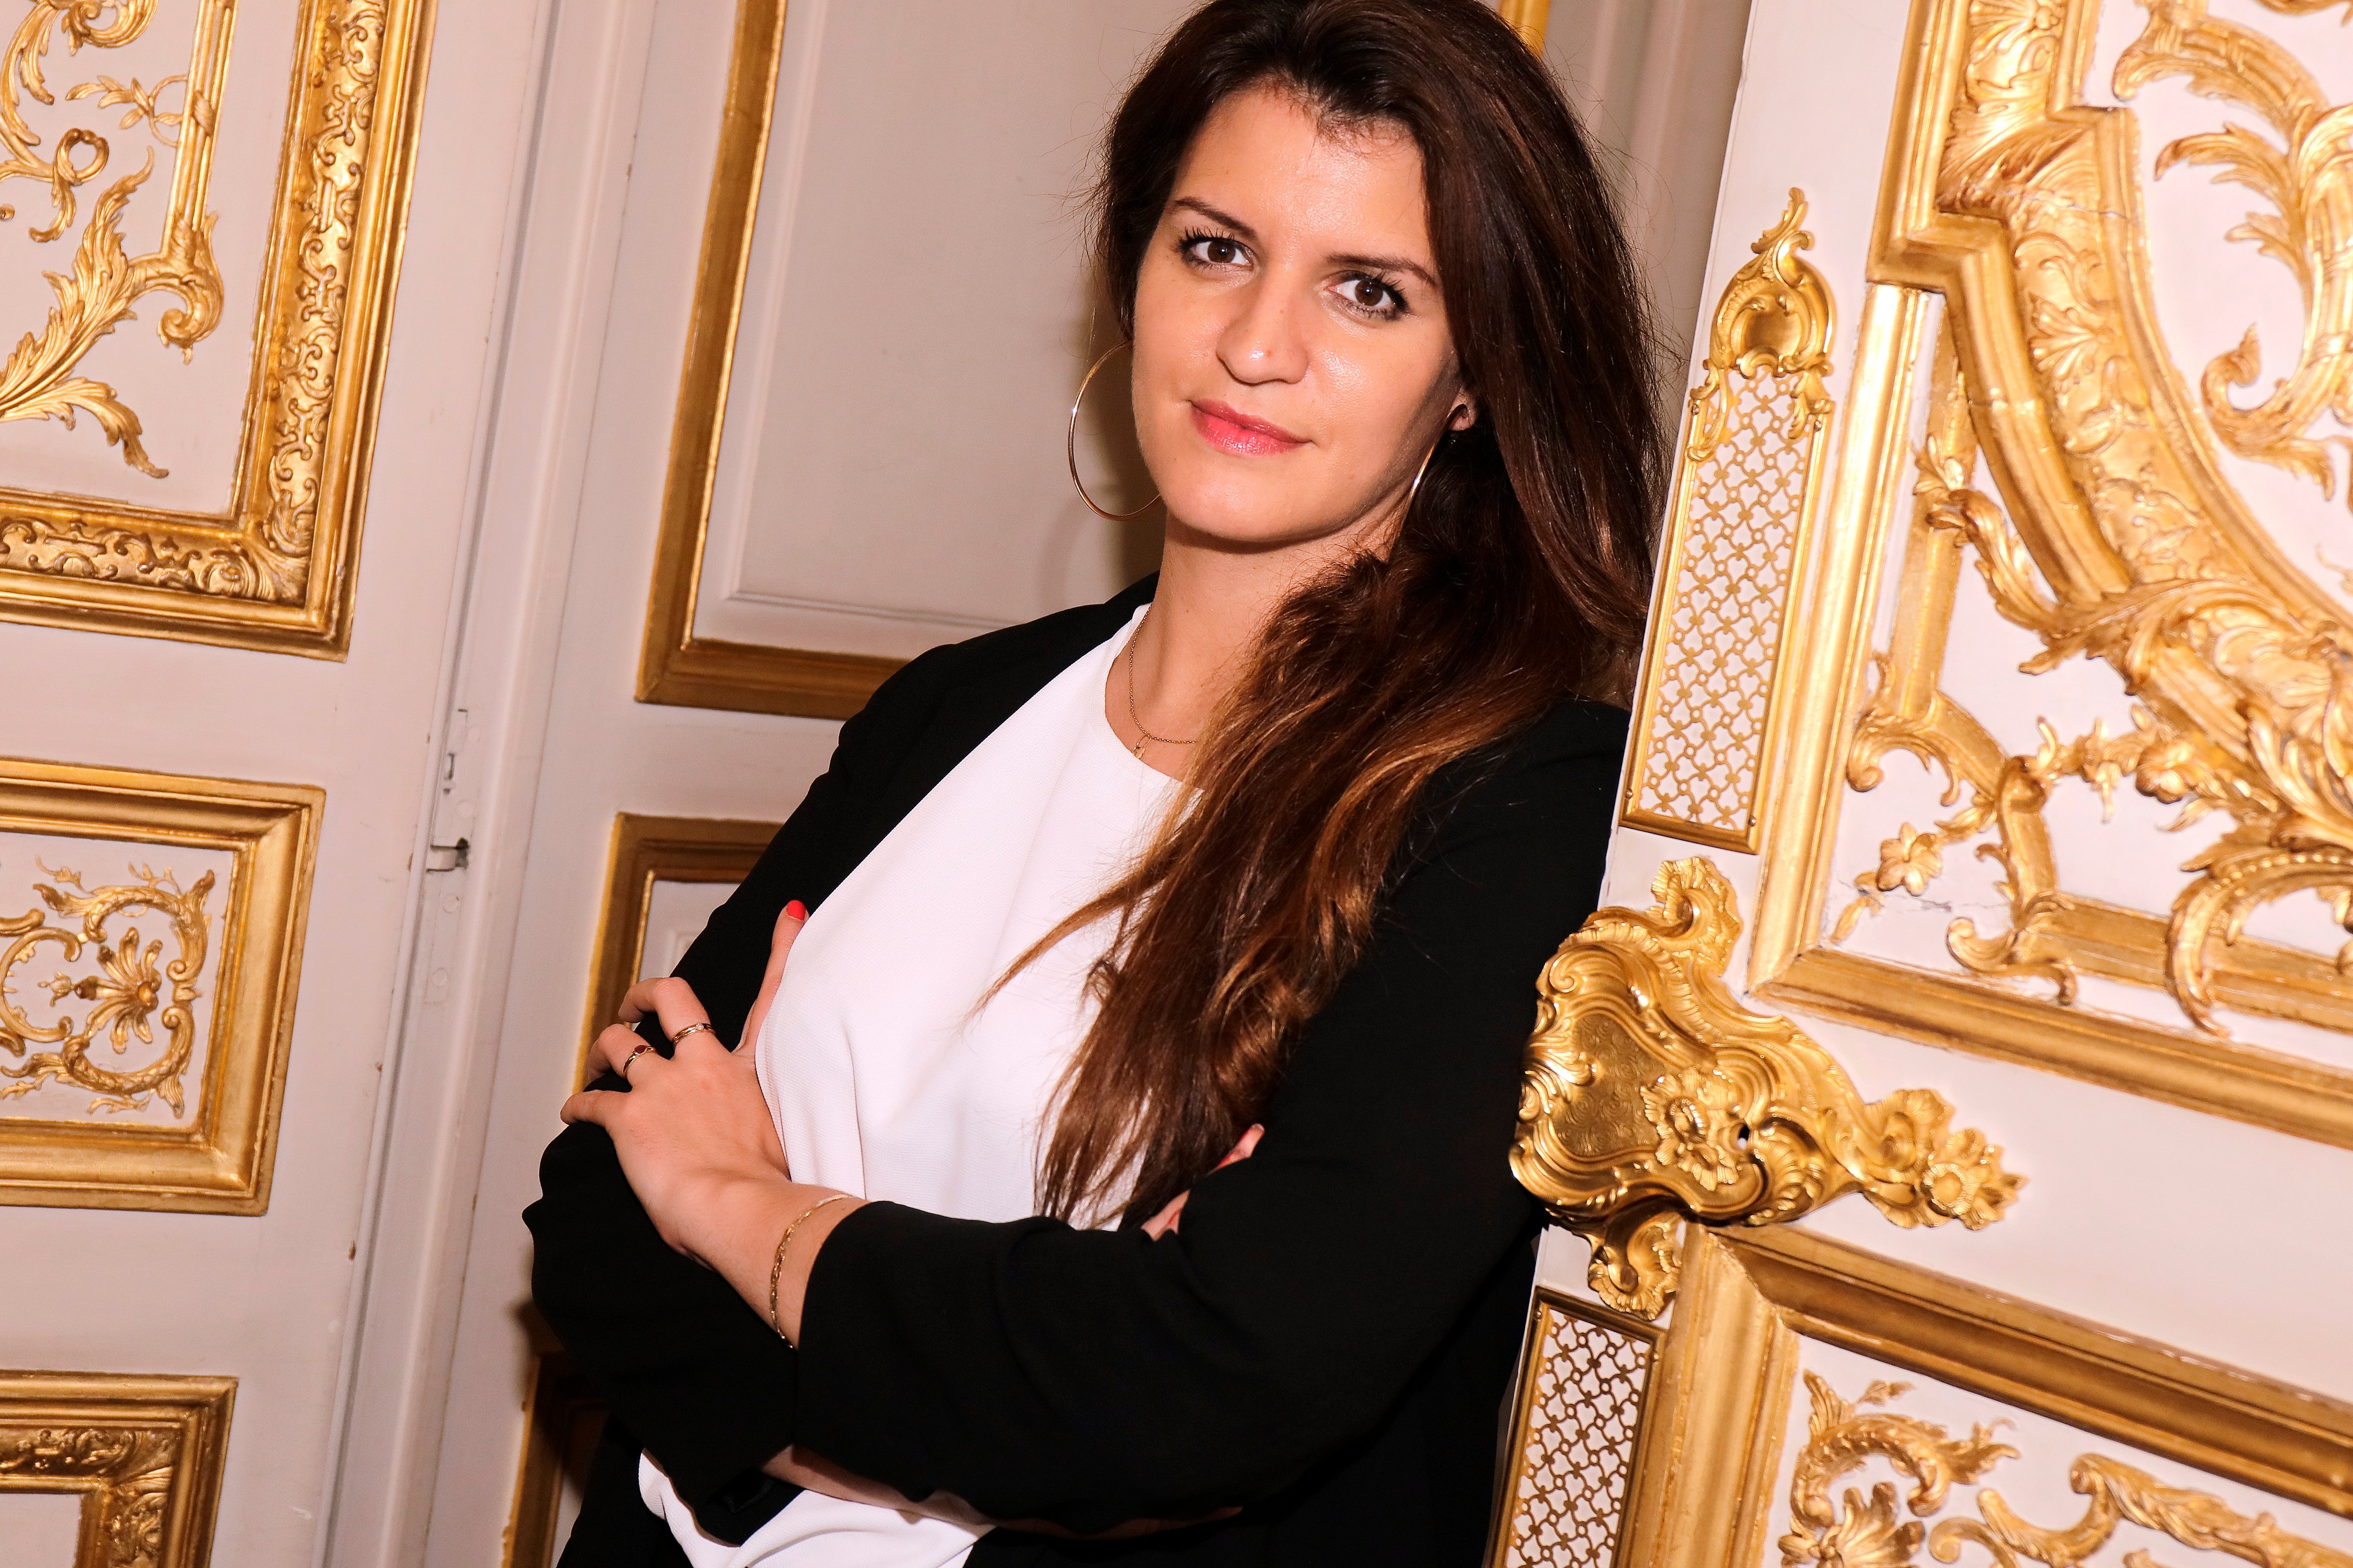 Marlene Schiappa poses in her office in Paris, France on April 7, 2018. (Eric Fougere - Corbis/Getty Images)